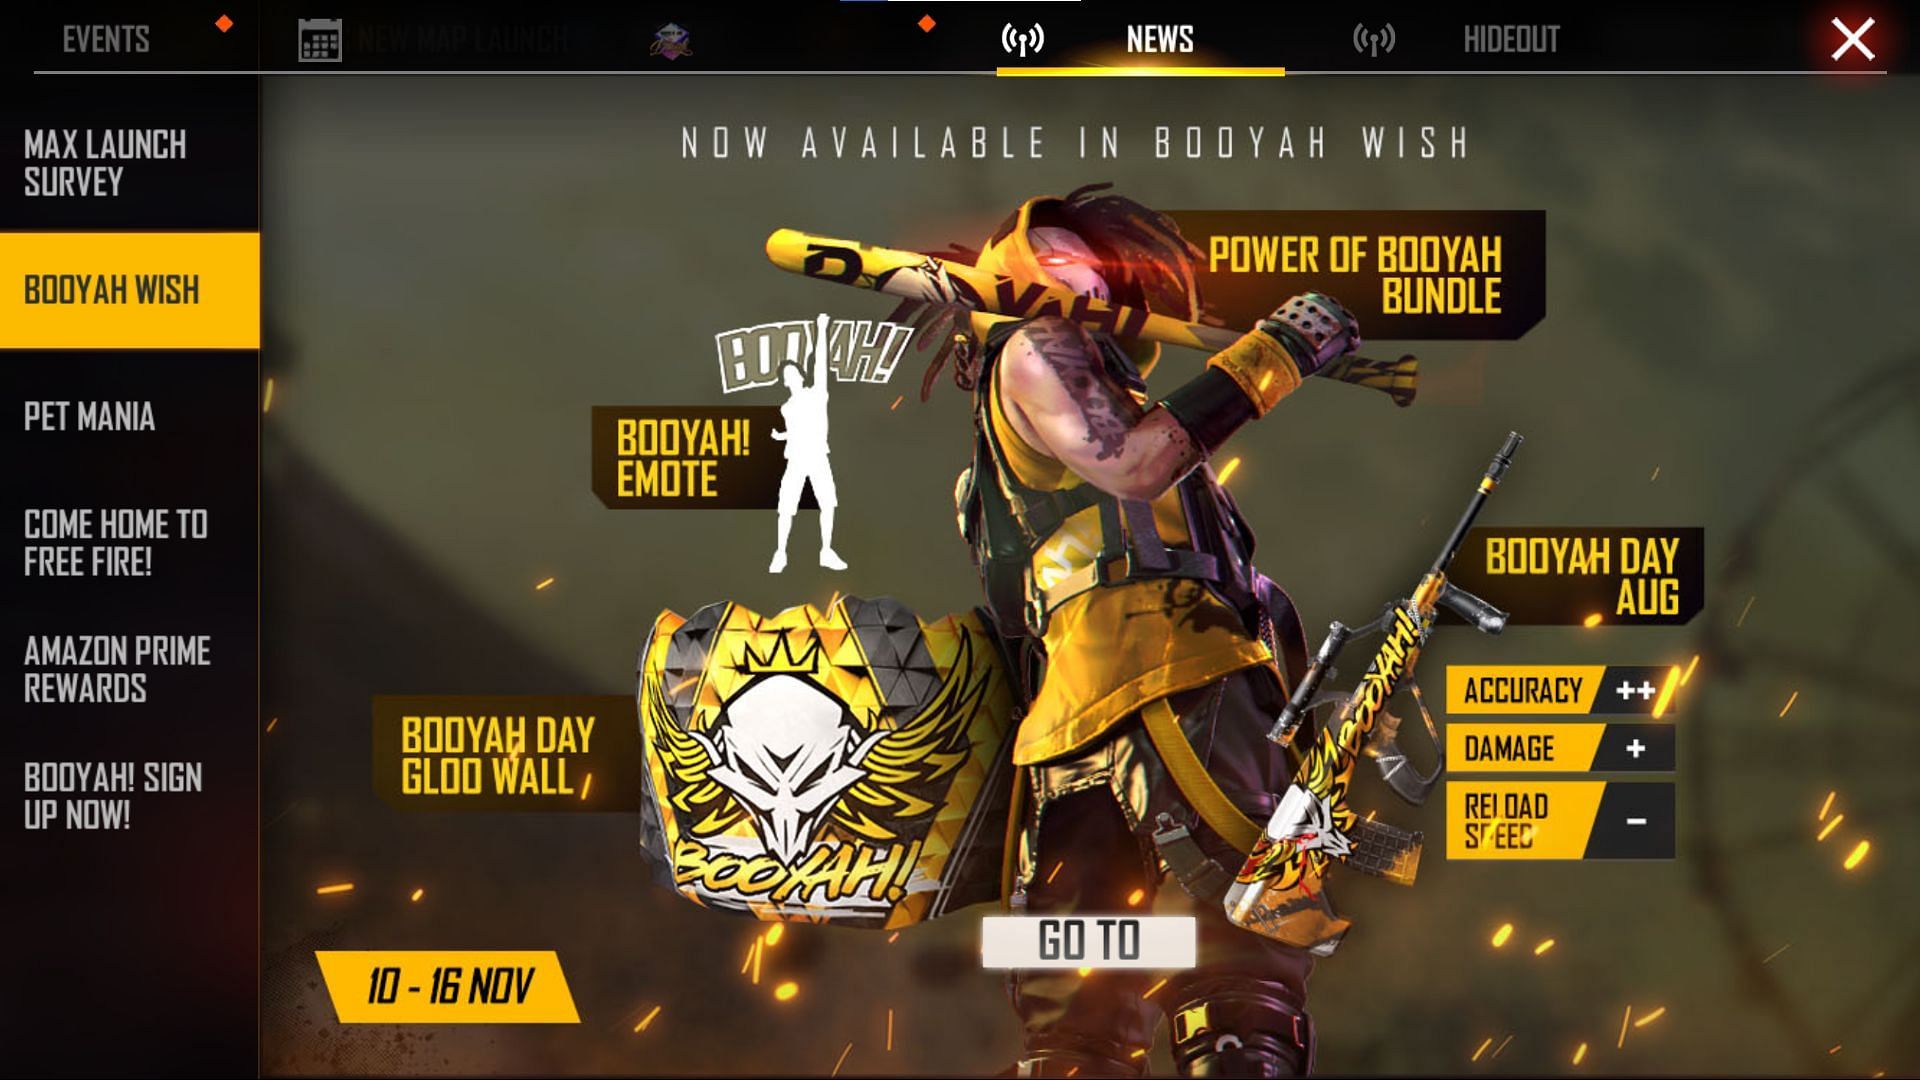 Visit the Booyah wish event interface (Image via Free FIre)